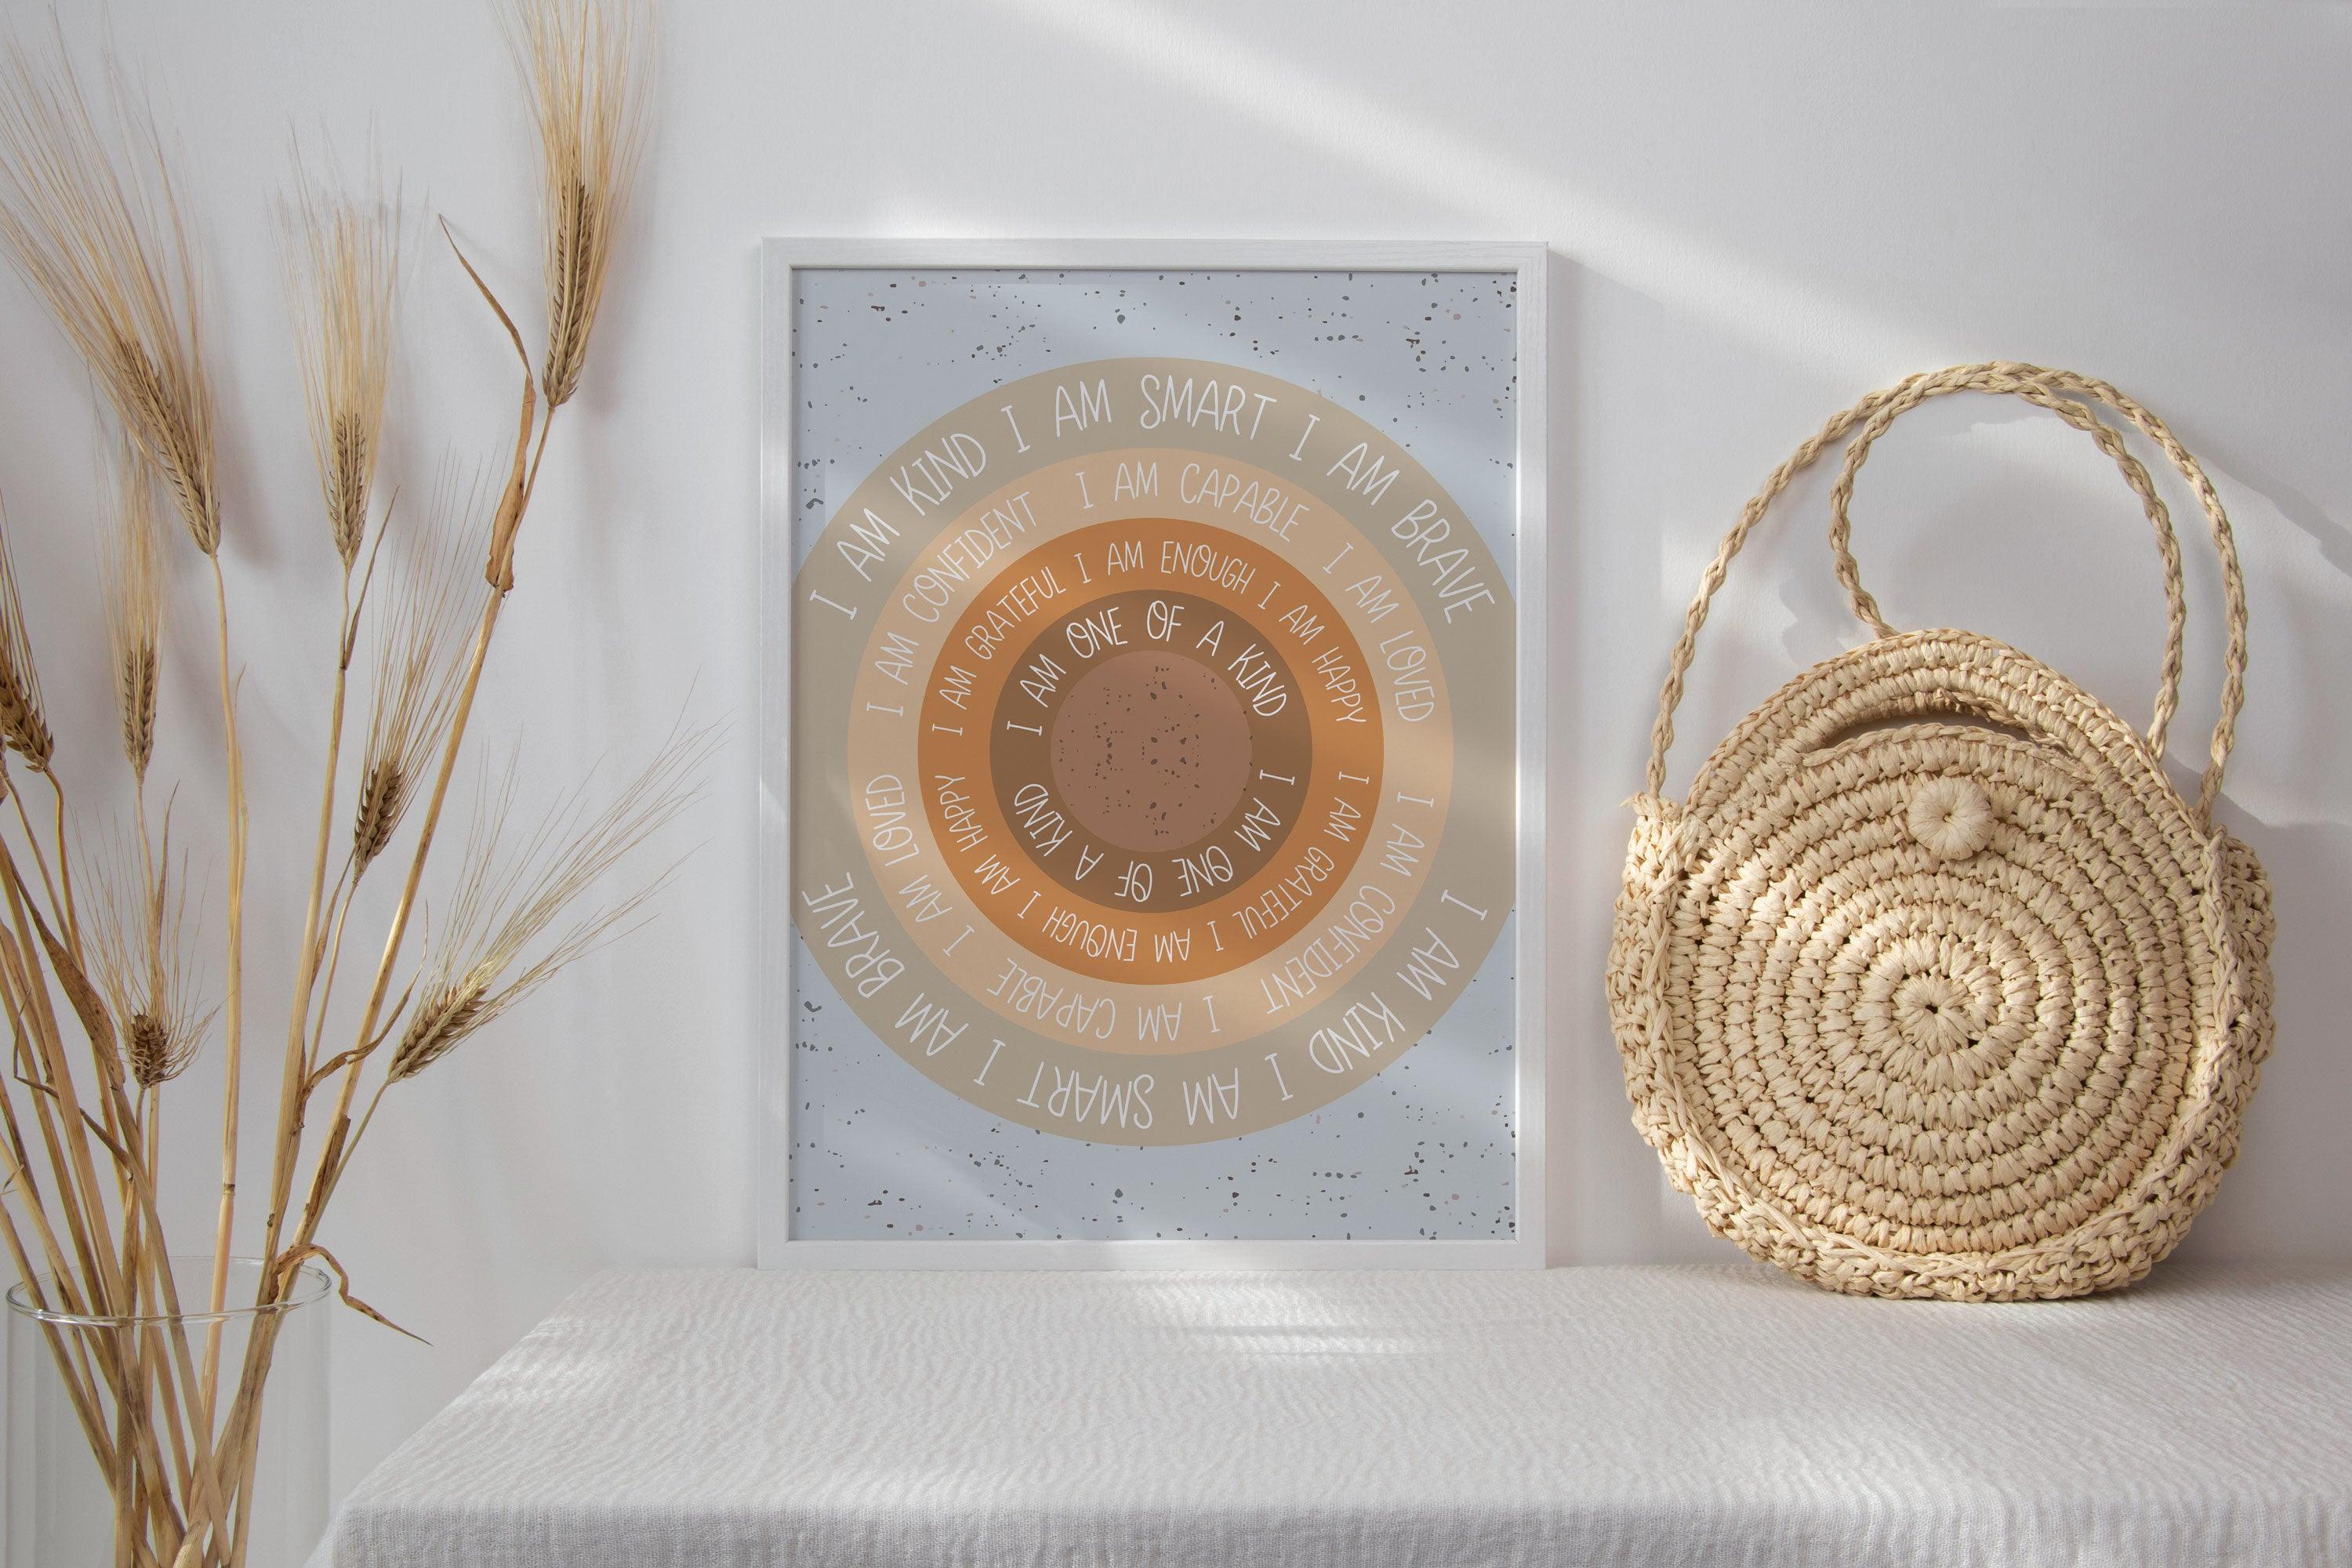 Affirmation Sunshine - Earth - Poster - The Willow Corner